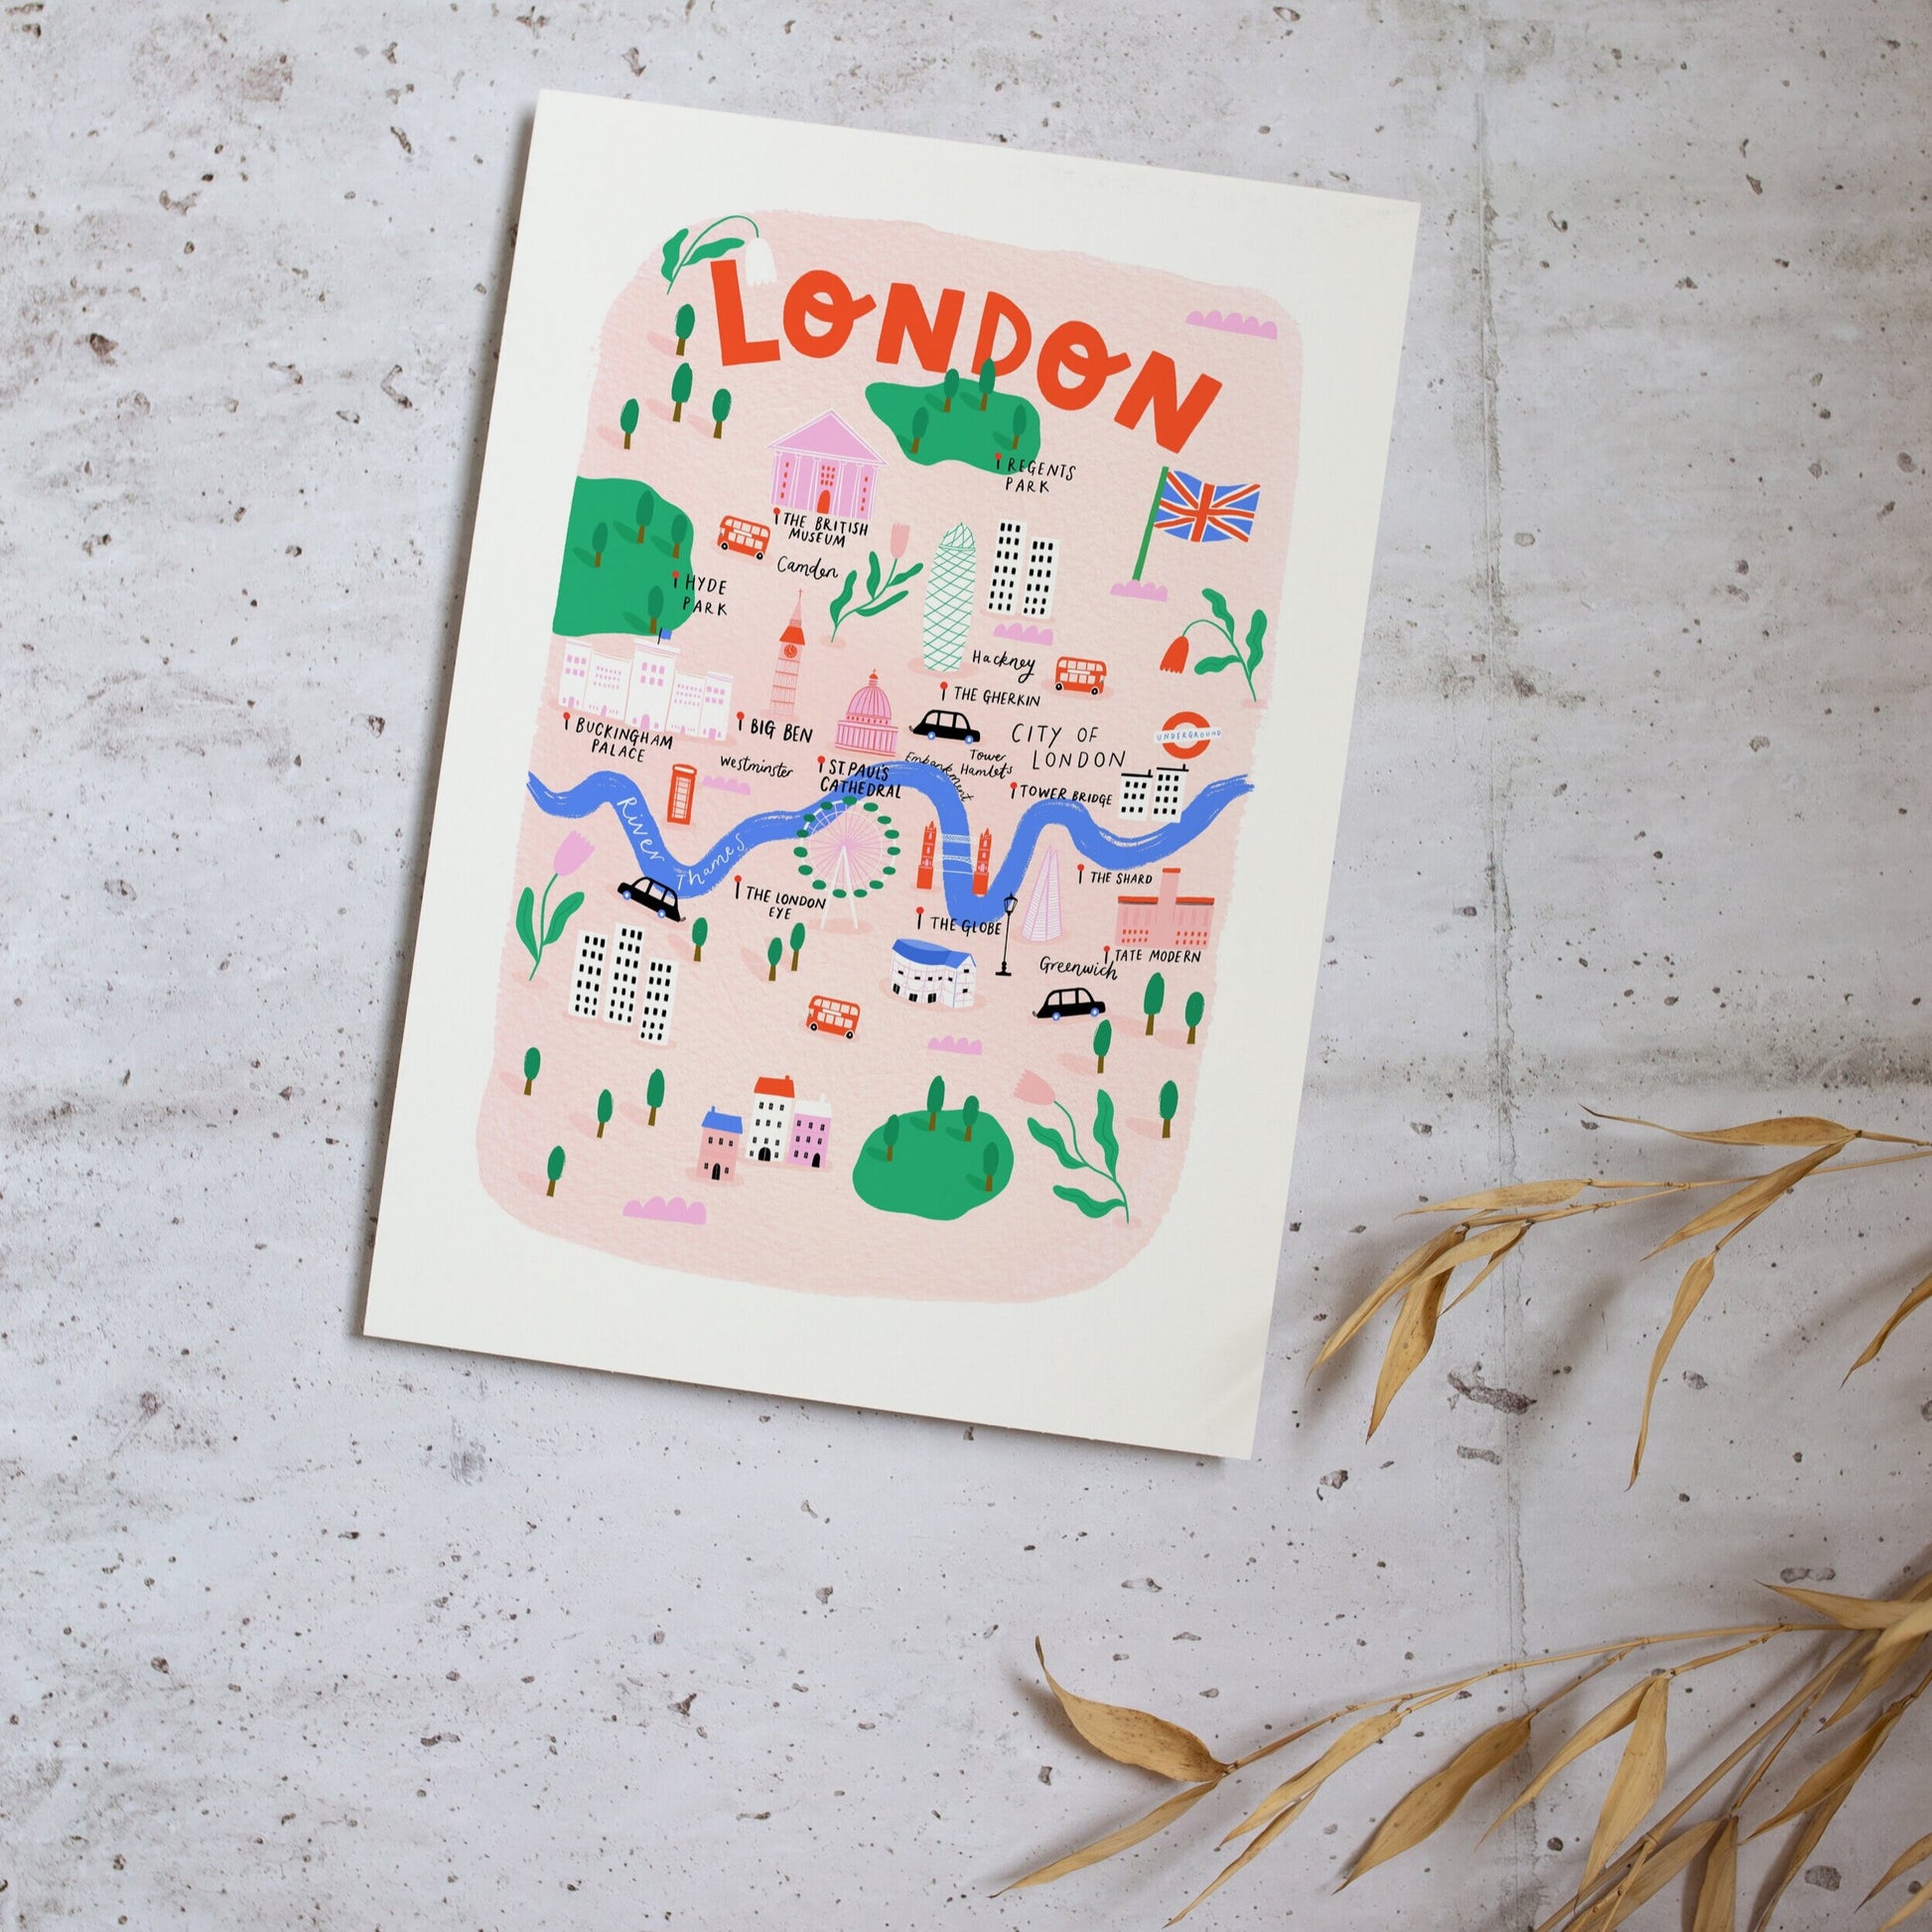 illustrated map of London, with pink background and all major landmarks. London is written at the top in red